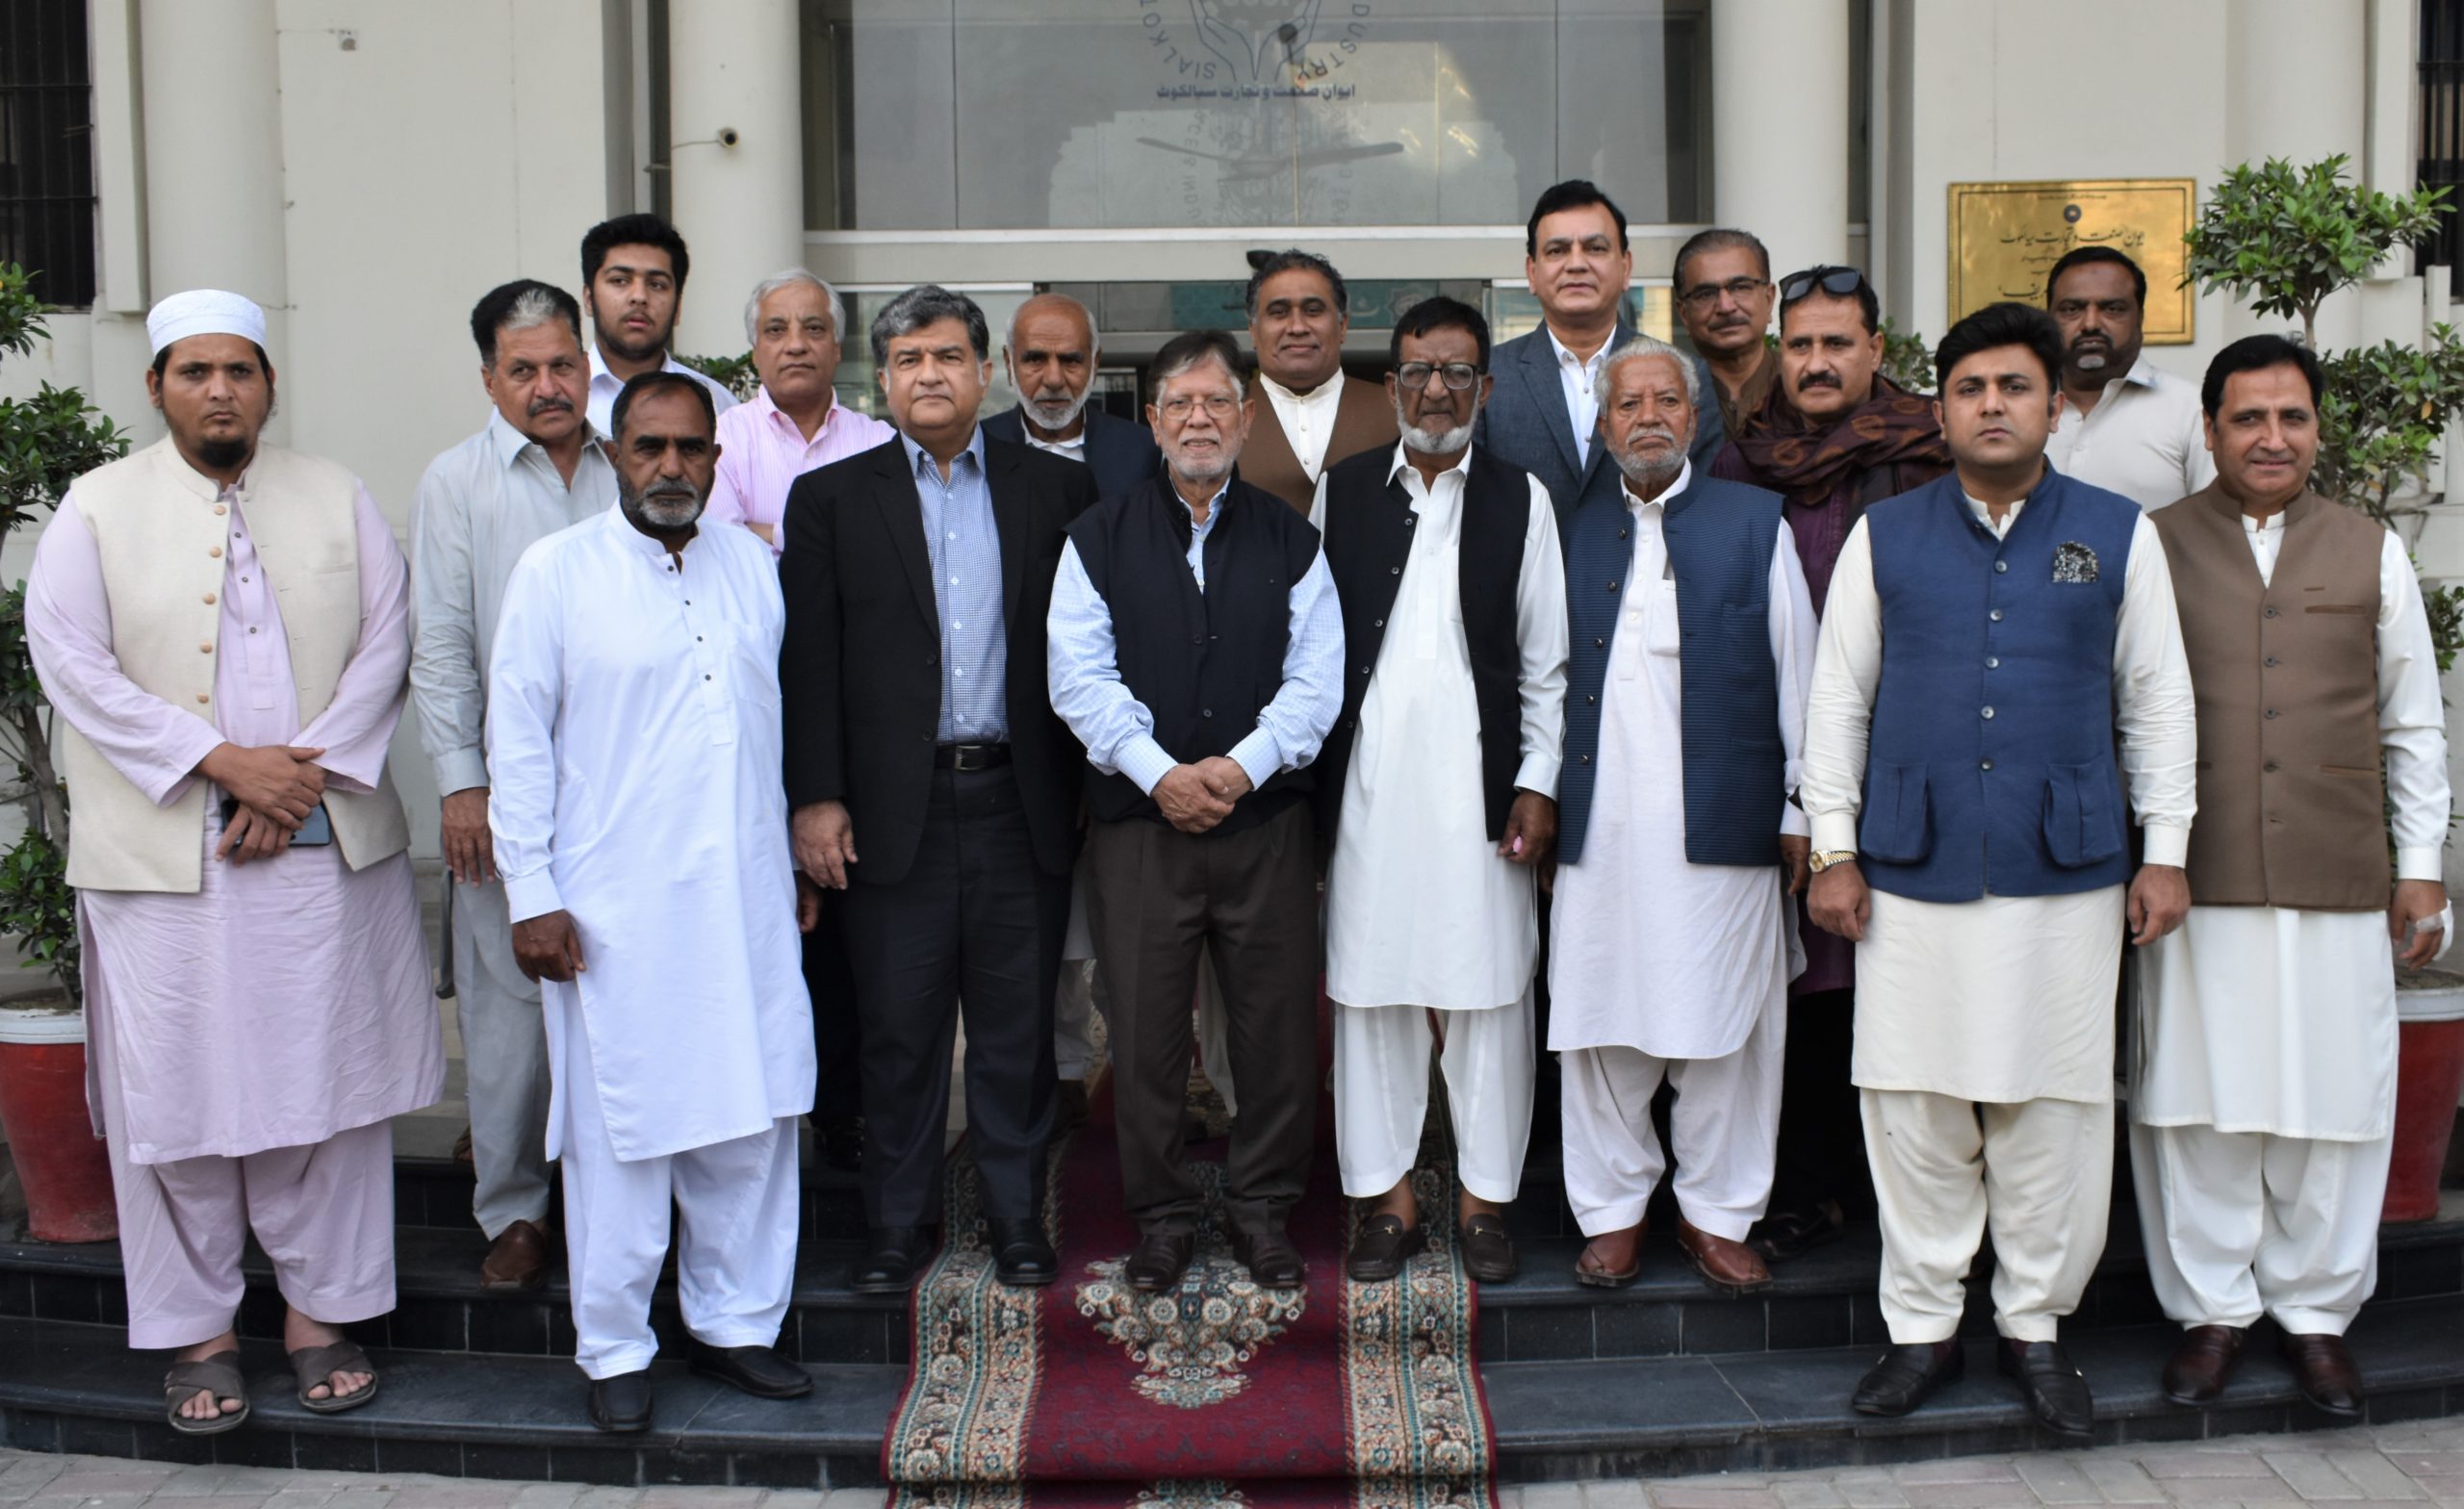 A delegation of Chakwal Chamber of Commerce & Industry led by Mr. Qazi Muhammad Akbar Vice President FPCCI Punjab along with Executive Members of Chakwal Chamber visited the Sialkot Chamber of Commerce & Industry on March 18, 2022.  Mian Imran Akbar, President, Sheikh Zohaib Raffique Sethi, Senior Vice President, Mr. Qasim Malik, Vice President and Executive Committee Sialkot Chamber of Commerce & Industry warmly welcomed the guests. Mian Imran Akbar, President SCCI discussed the areas of mutual cooperation and future collaborations for properly highlighting the issues of trade and industry in the Government Corridors.